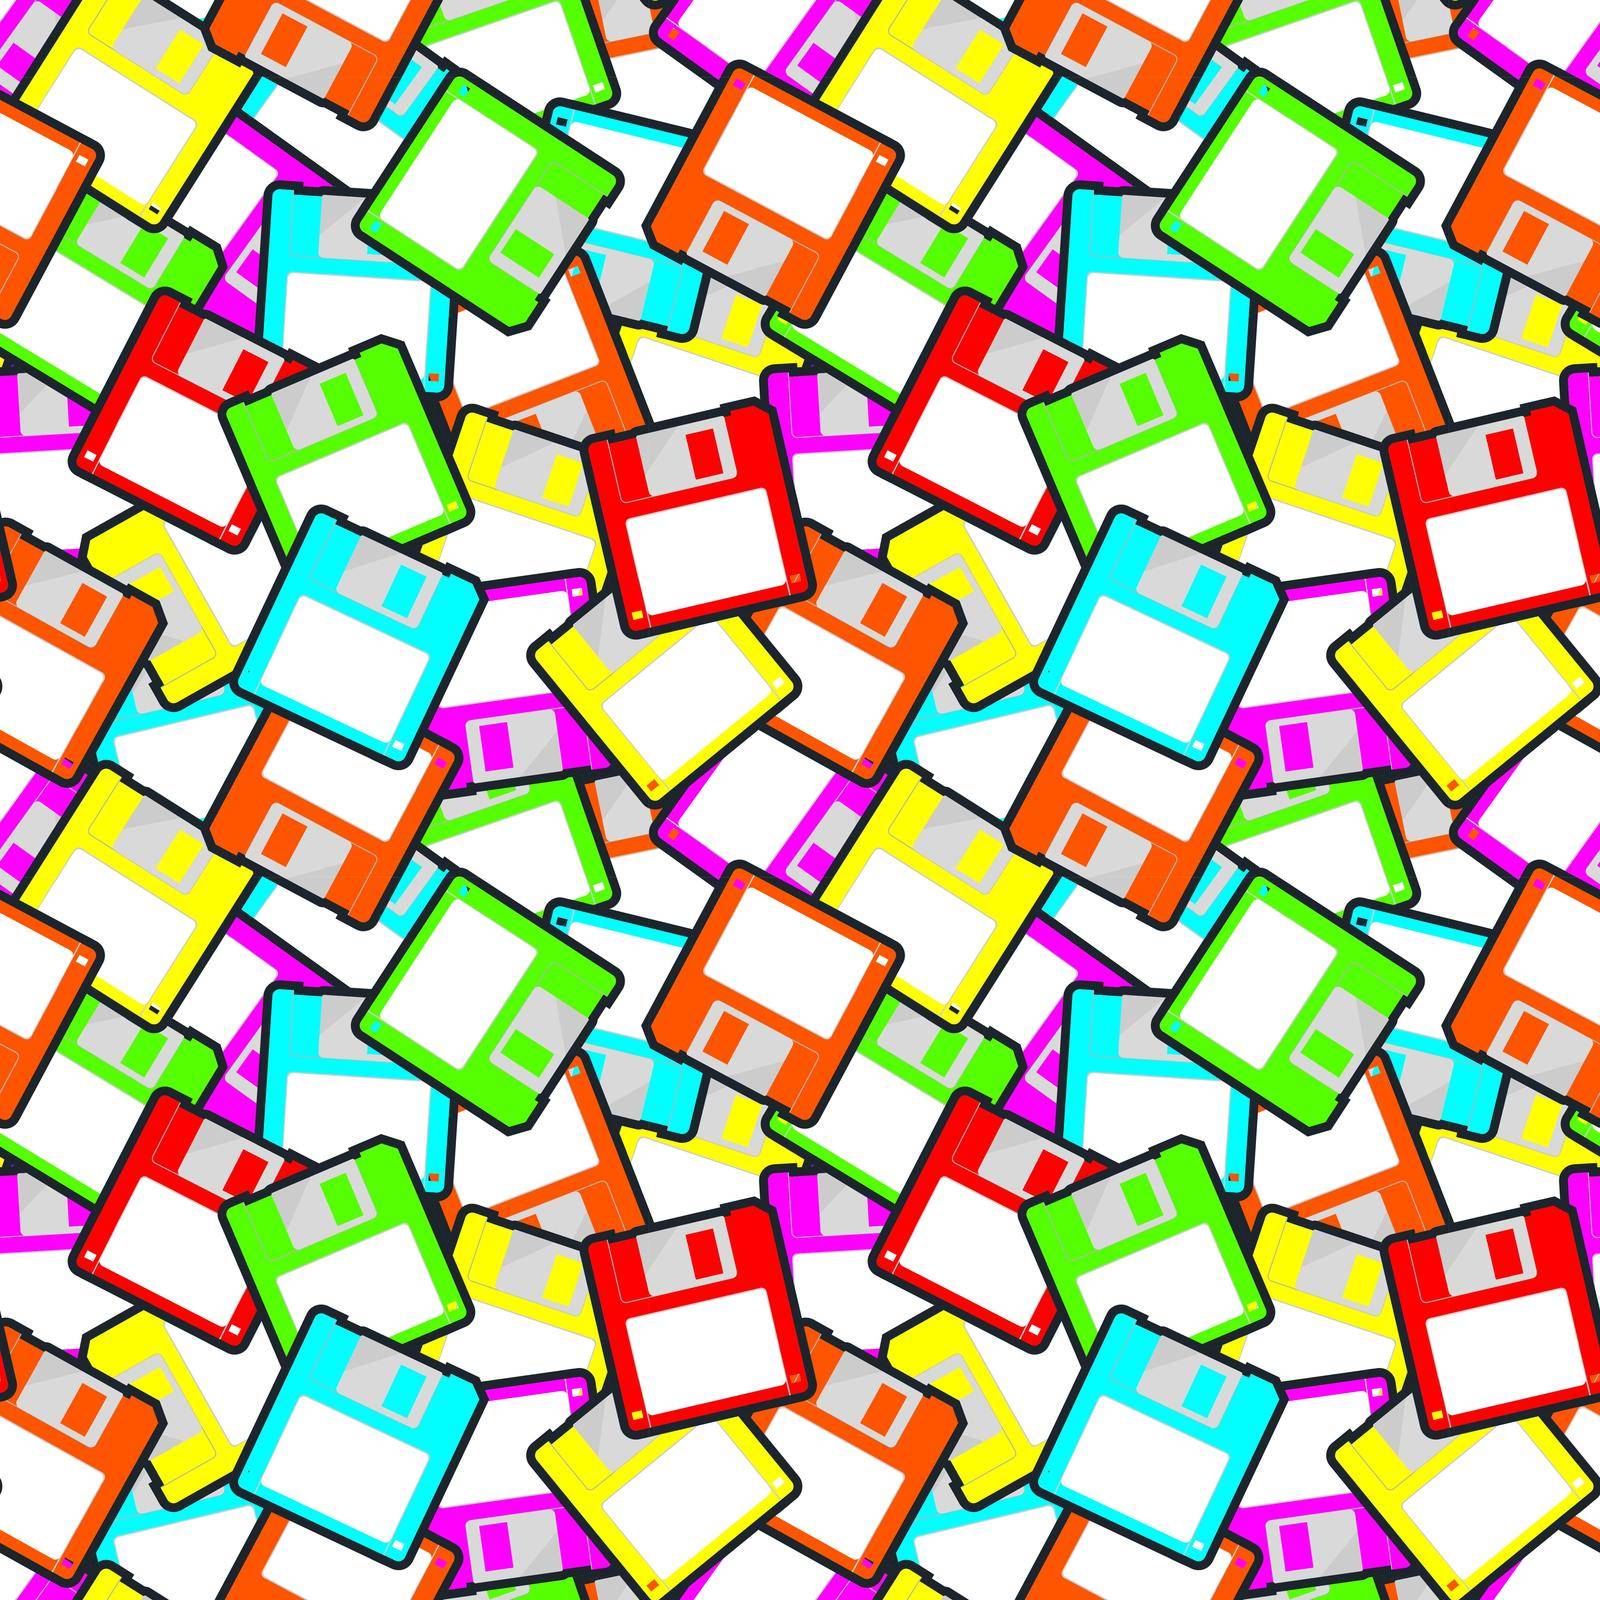 Colorful Diskette Pile Repeating Seamless Background by apollocat